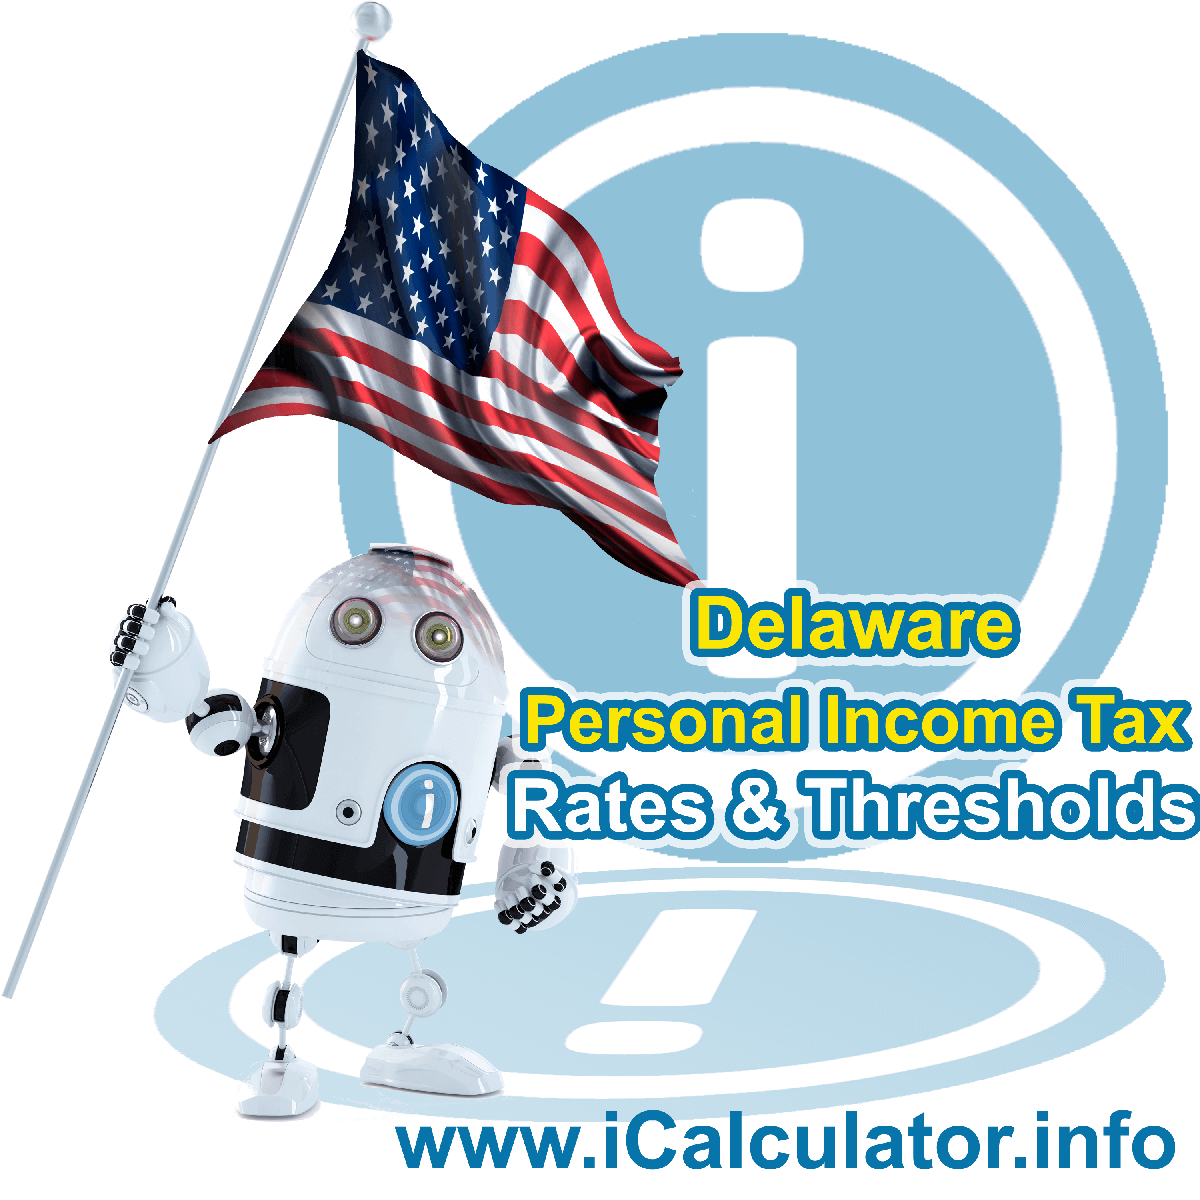 Delaware State Tax Tables 2023. This image displays details of the Delaware State Tax Tables for the 2023 tax return year which is provided in support of the 2023 US Tax Calculator